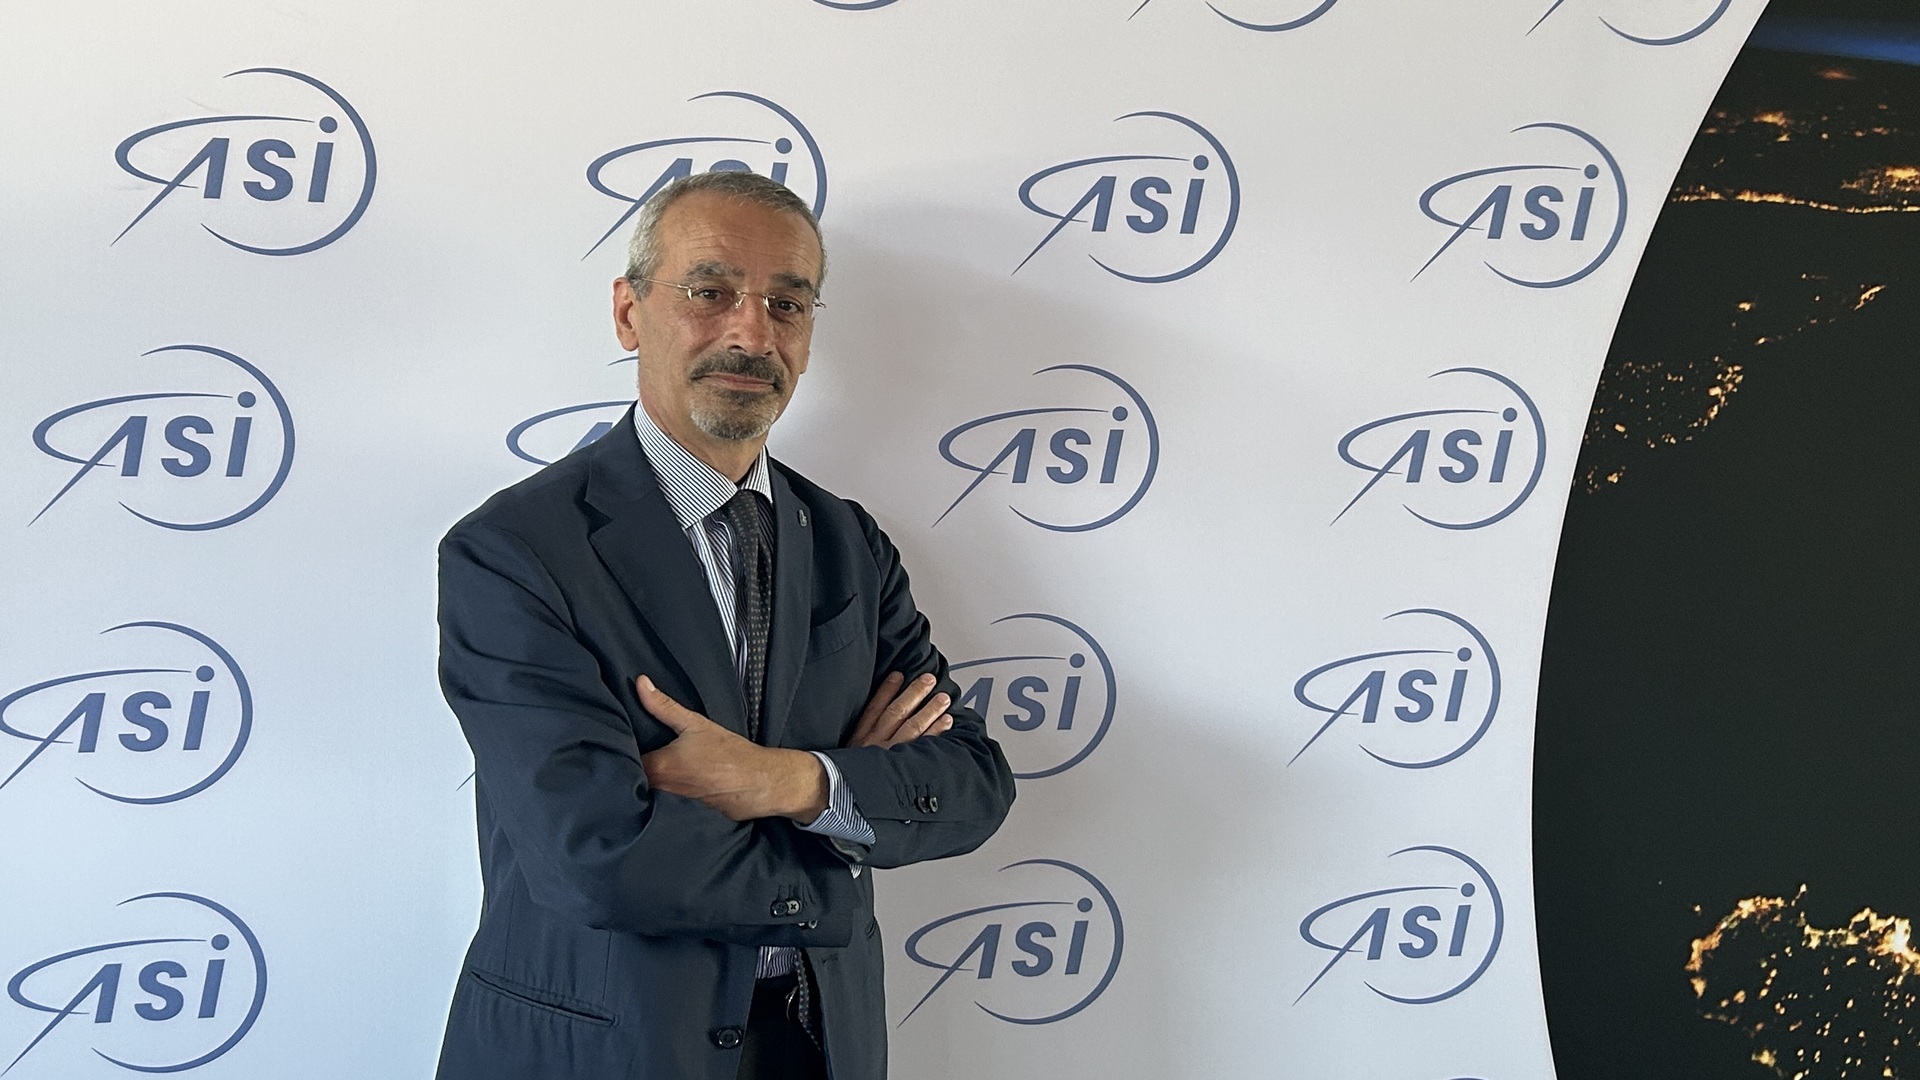 ASI - Teodoro Valente is the new president of the Italian Space Agency (ASI)